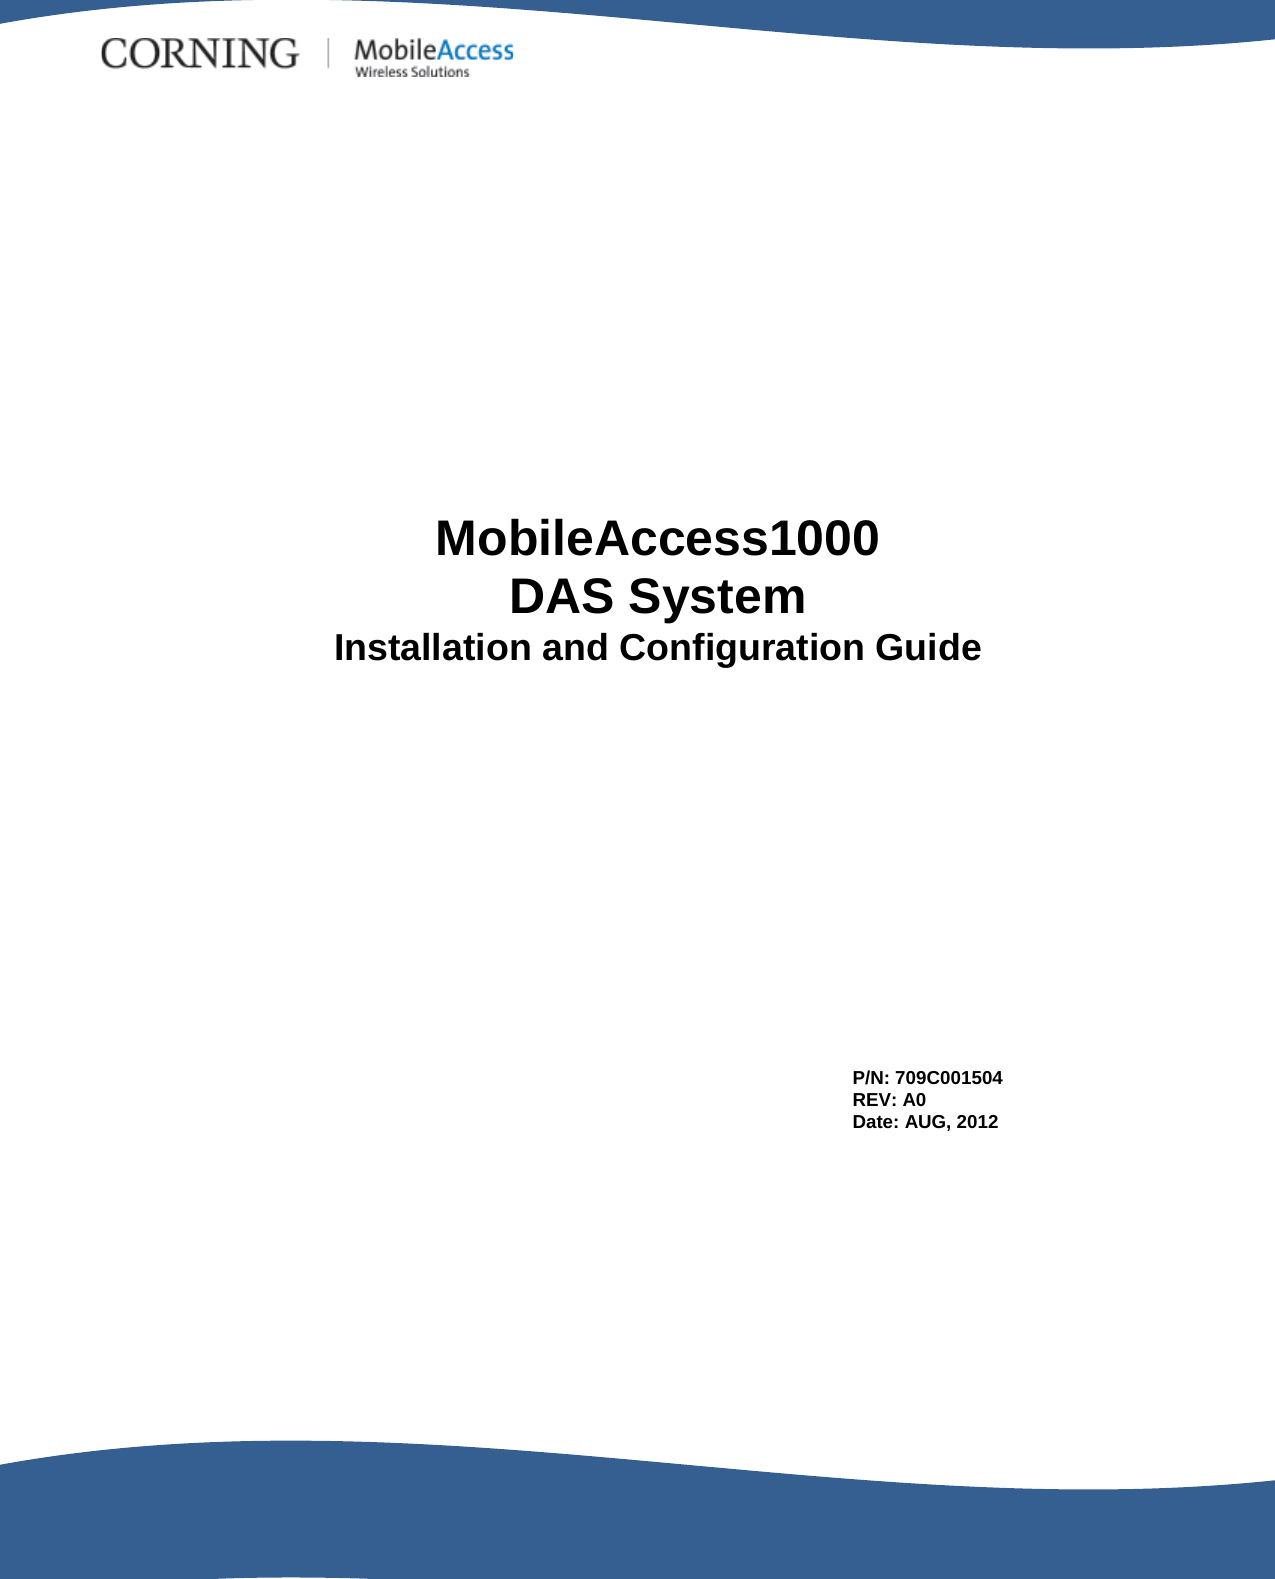                                                          MobileAccess1000  DAS System Installation and Configuration Guide P/N: 709C001504 REV: A0 Date: AUG, 2012 